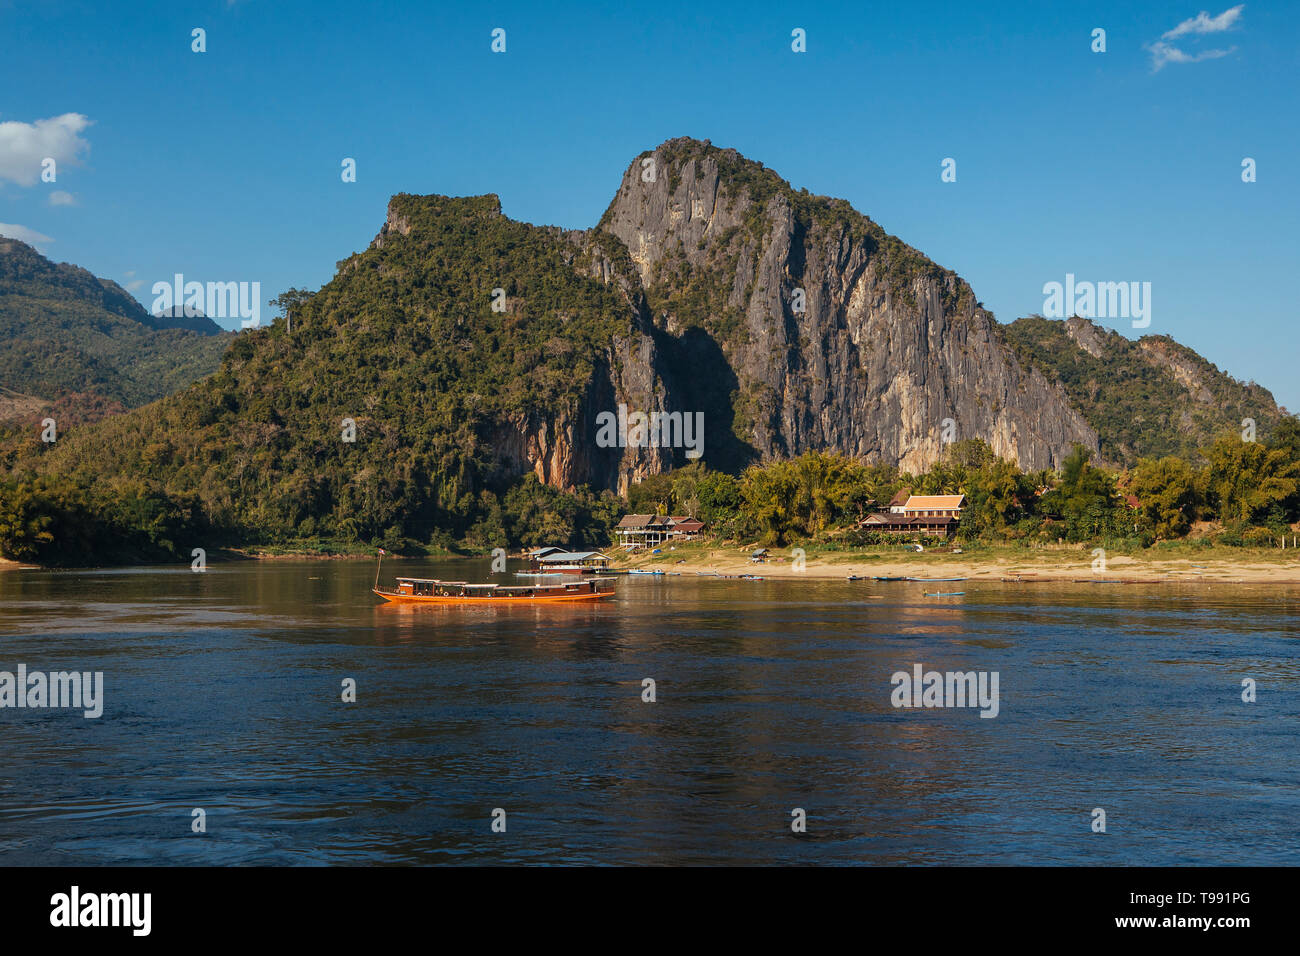 Mekong River and Mountains in Laos Stock Photo